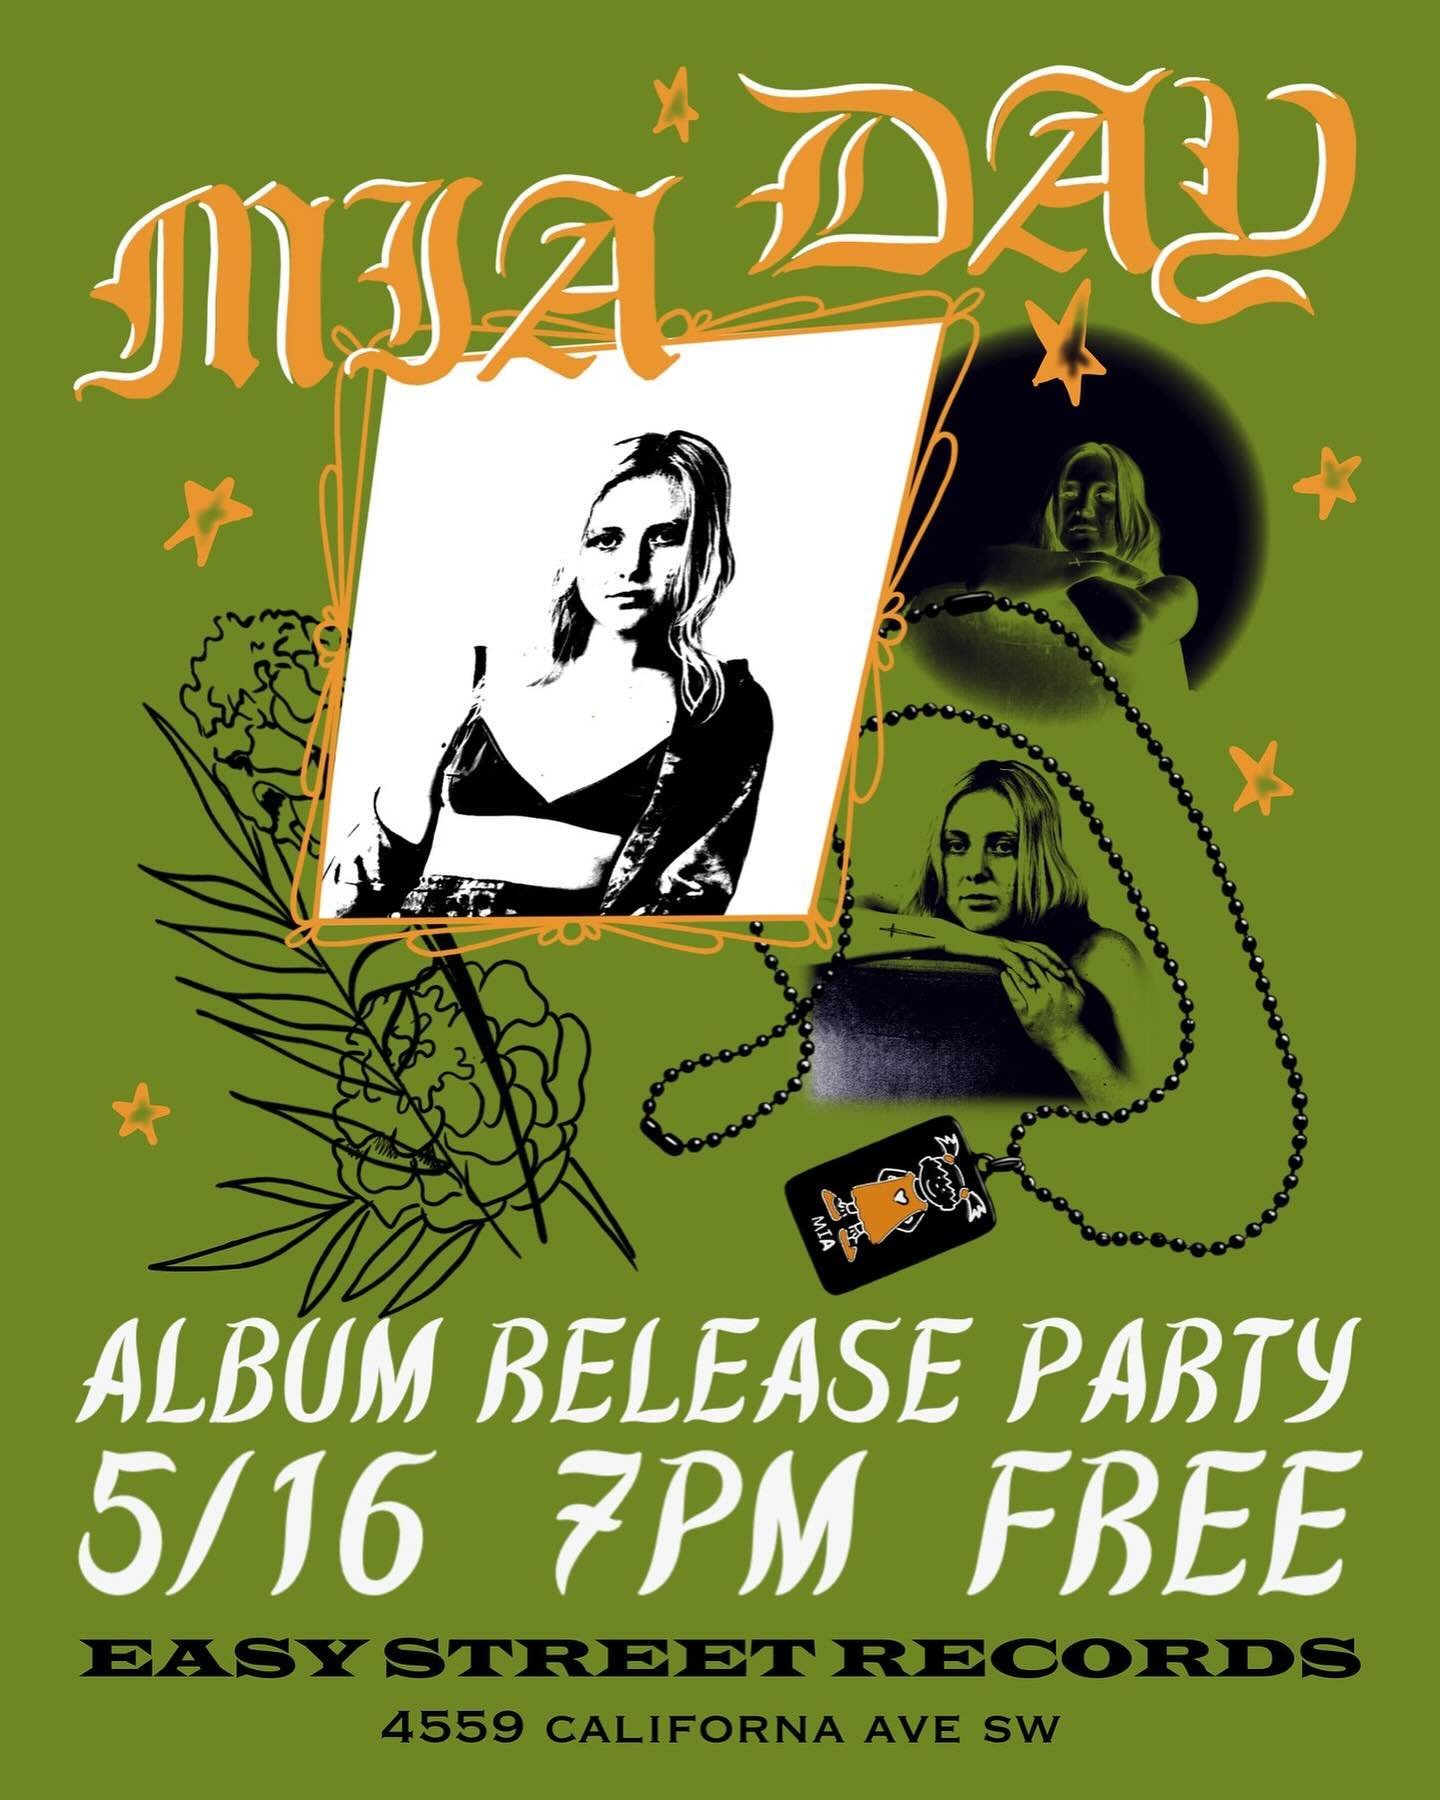 5/16 ALBUM RELEASE PARTY. Easy Street Records, 7pm, all ages, free. We&rsquo;re playing the album front to back the night before it comes out, it would mean the world to see you there. I&rsquo;ll probably shoot projectile tears out of my eyes. Sellin